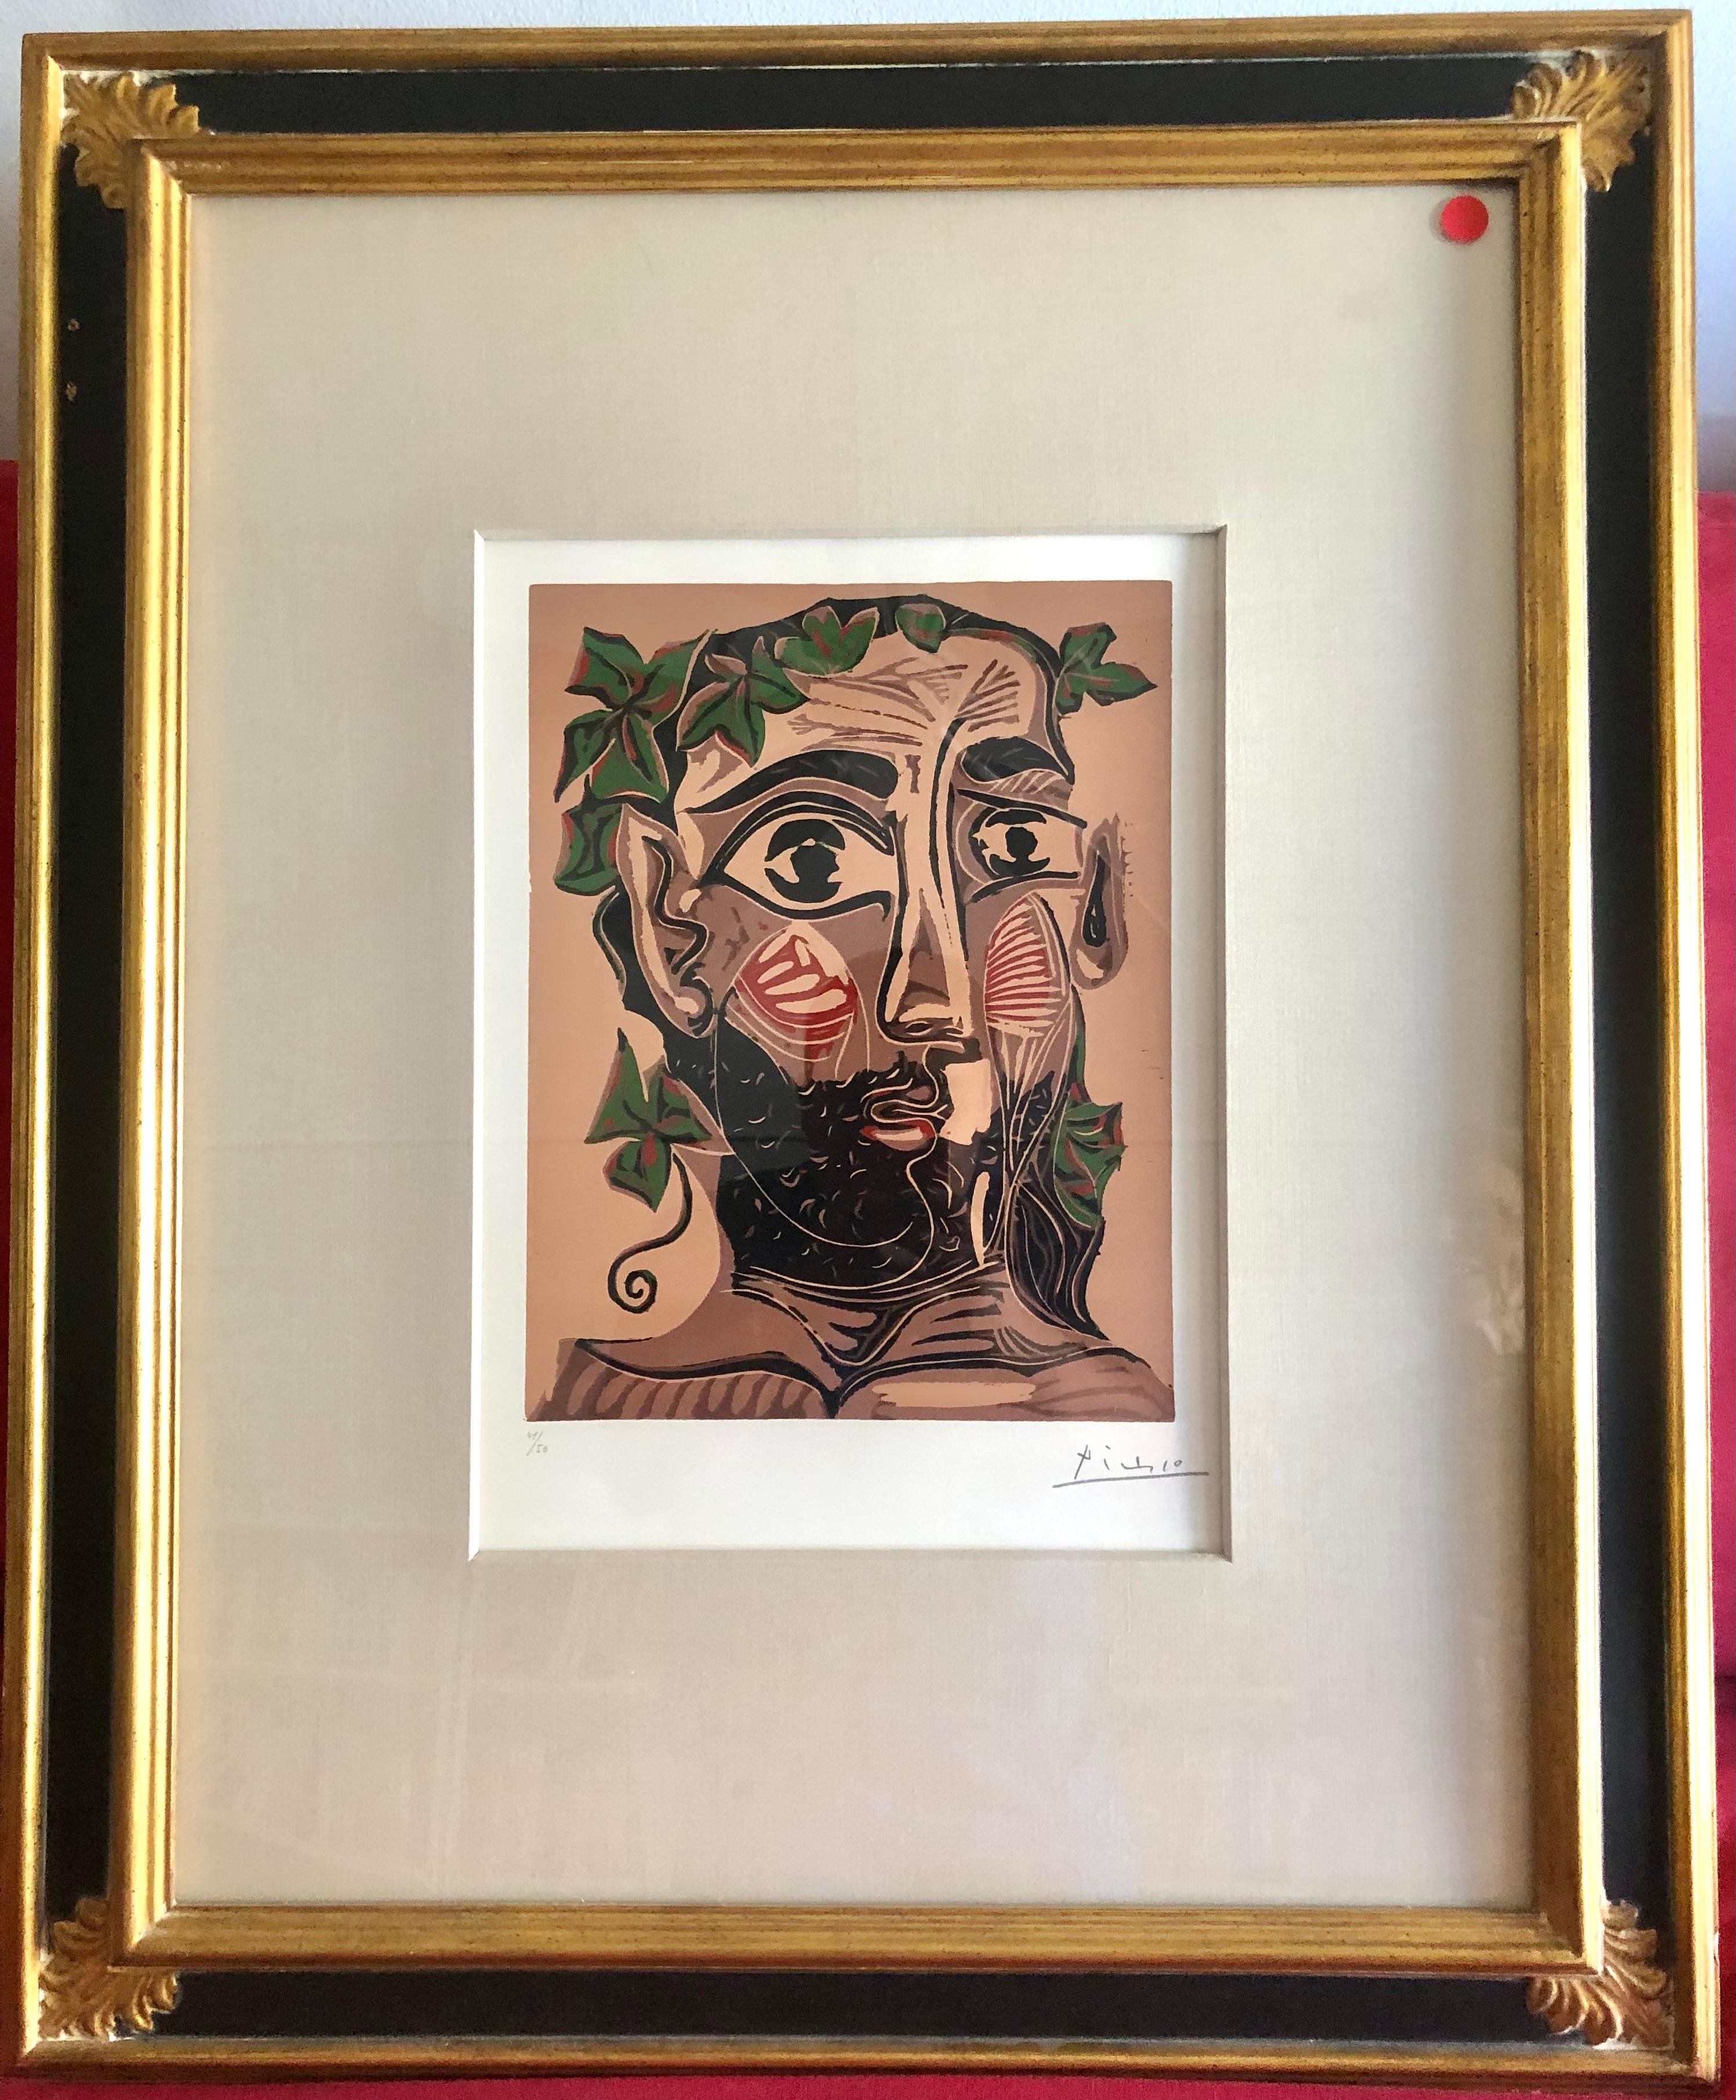 Homme barbu couronné de Feuillage (Bearded Man Crowned with Greenery) - Print by Pablo Picasso